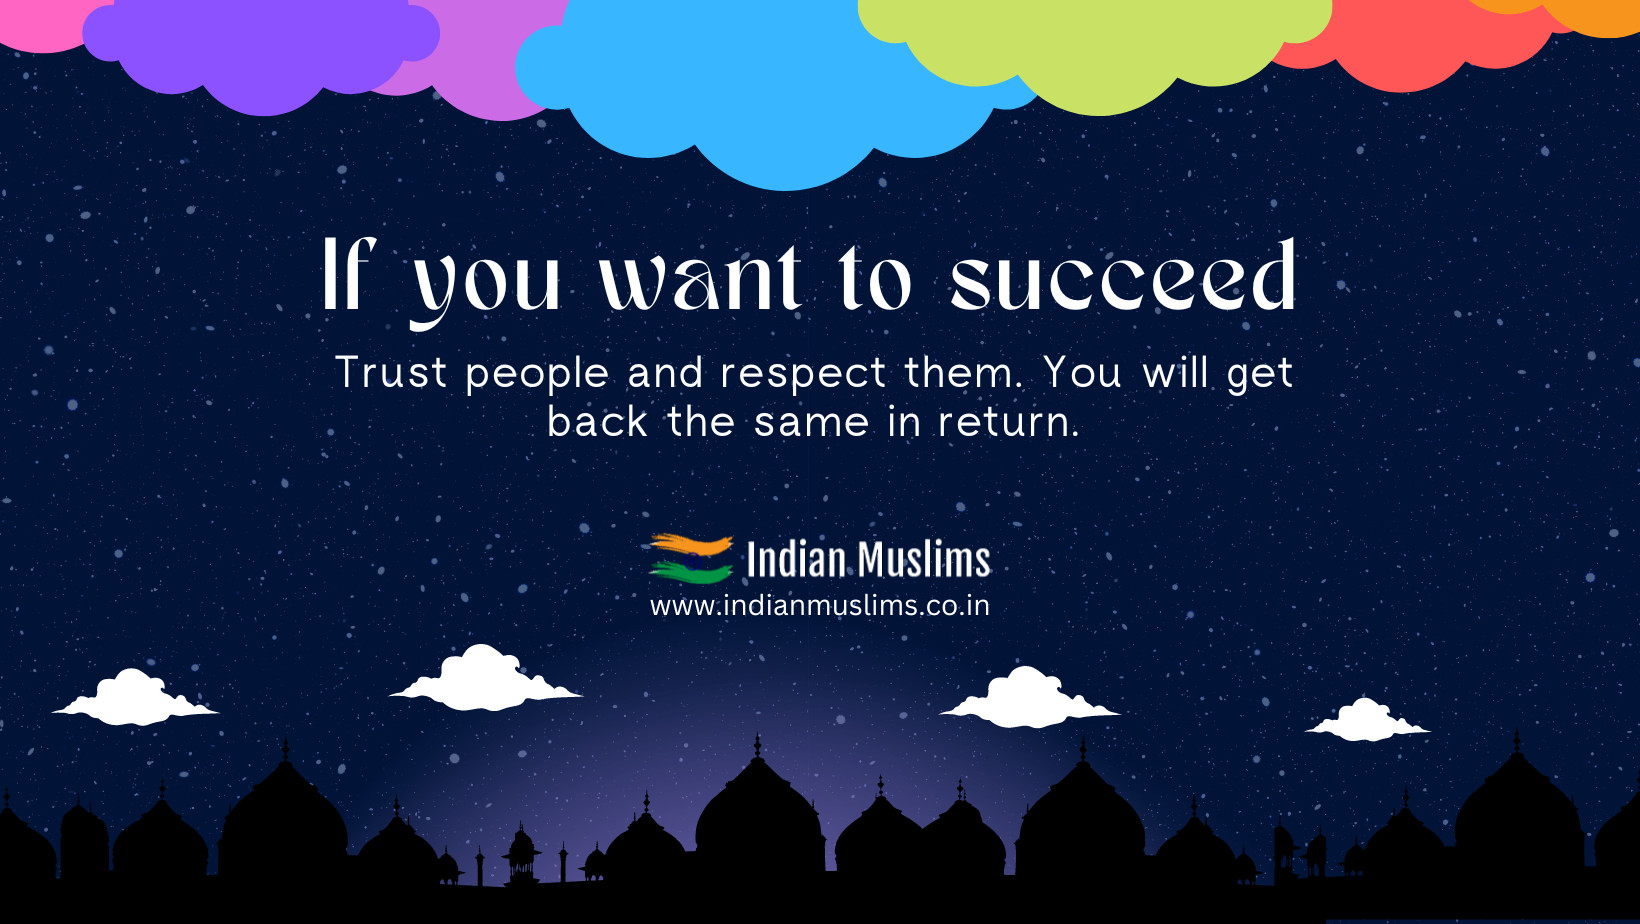 indianmuslimstrust 1 - IndianMuslims.Co.In - Educate & Empower